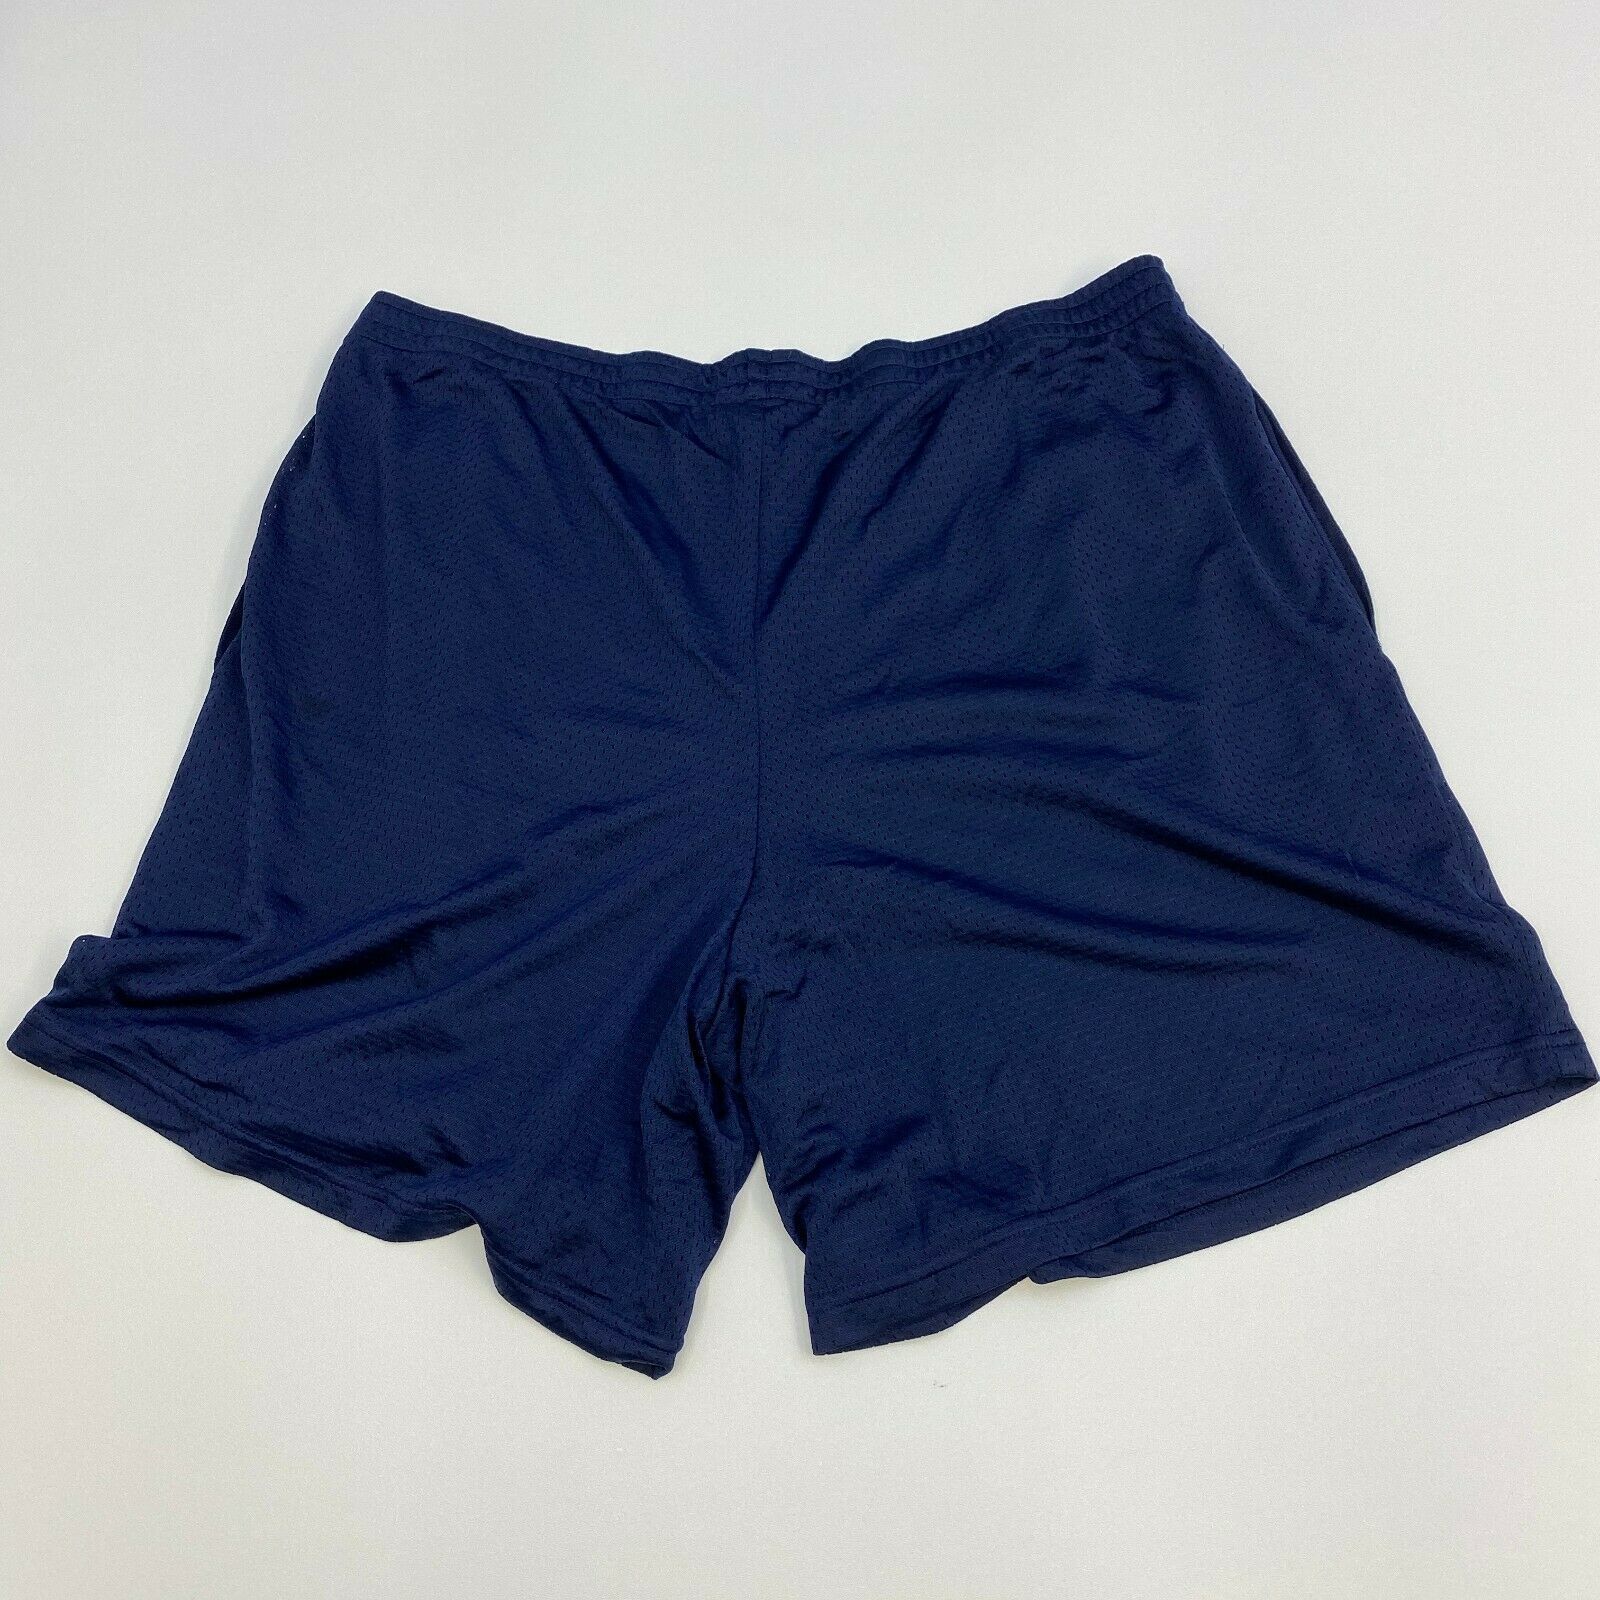 Starter Athletic Shorts Mens XXL Blue Casual Workout Basketball - Shorts